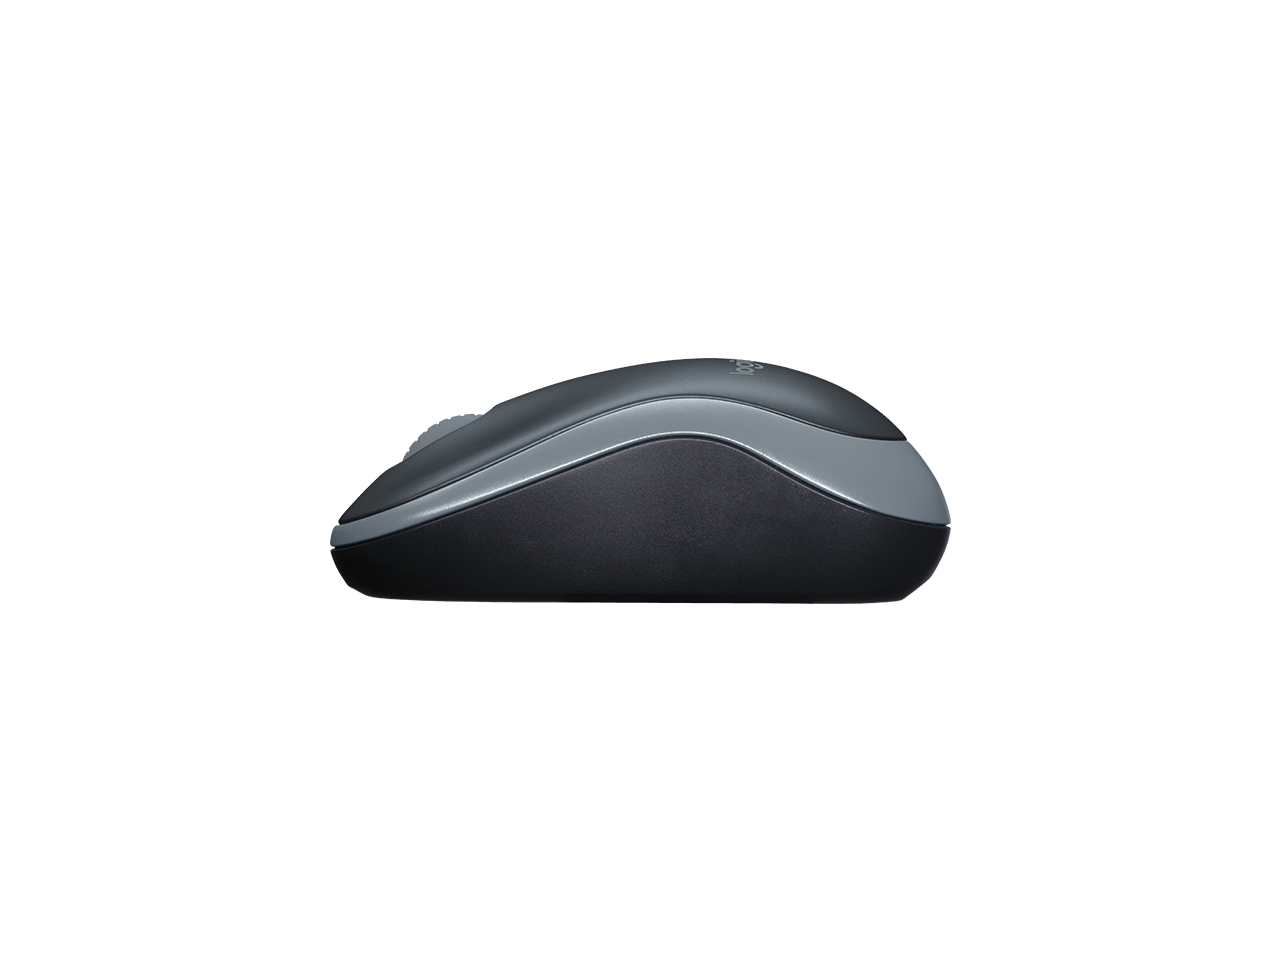 forgetting logitech mouse mac